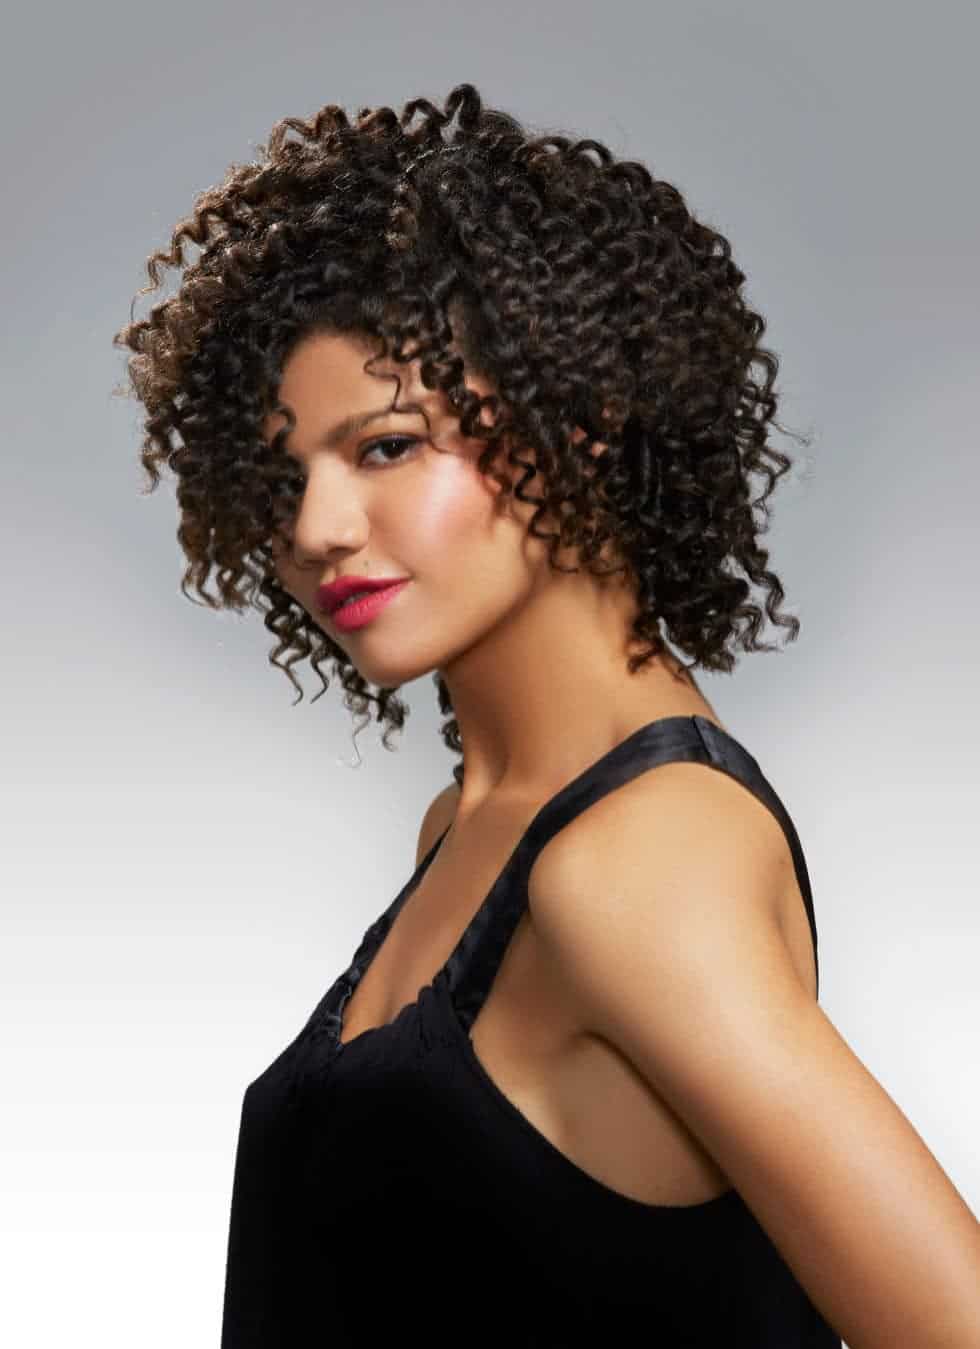  frizzy curly short hairstyle for women 